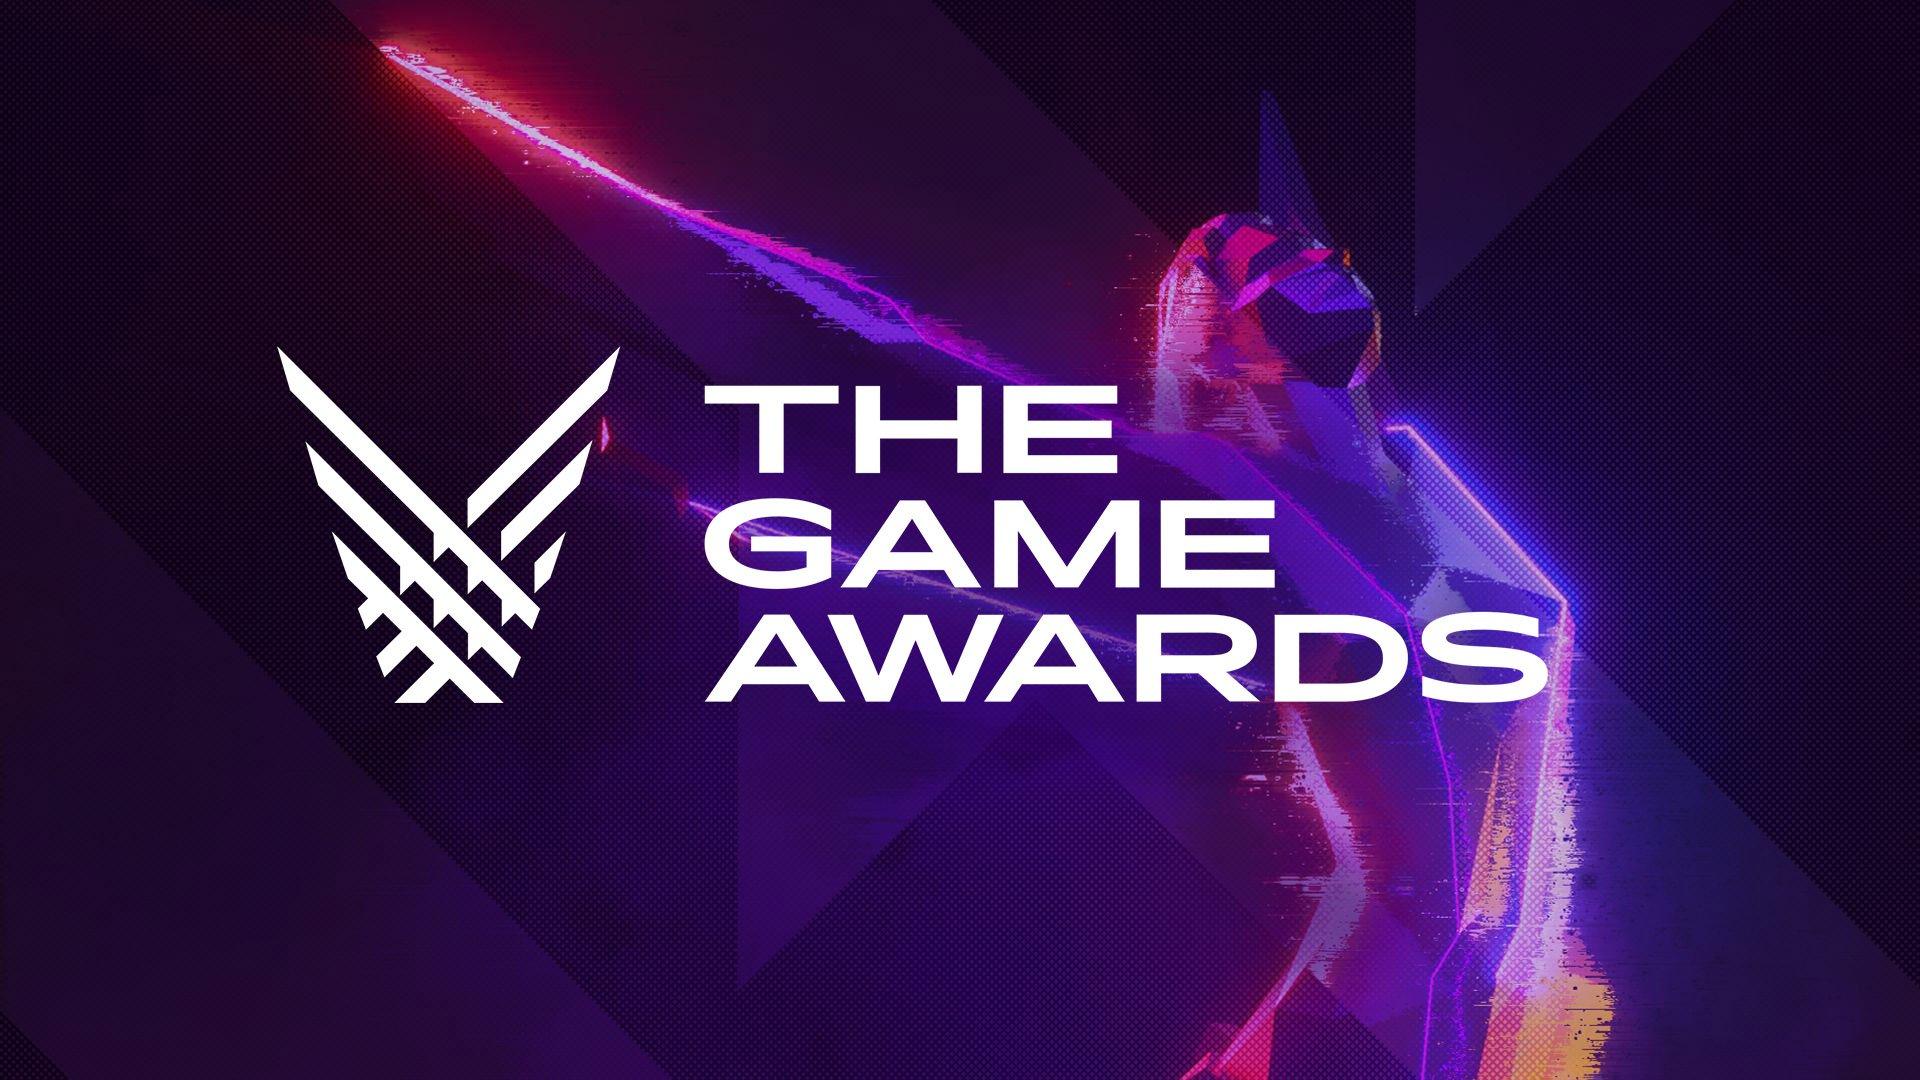 When Is The Game Awards 2019?